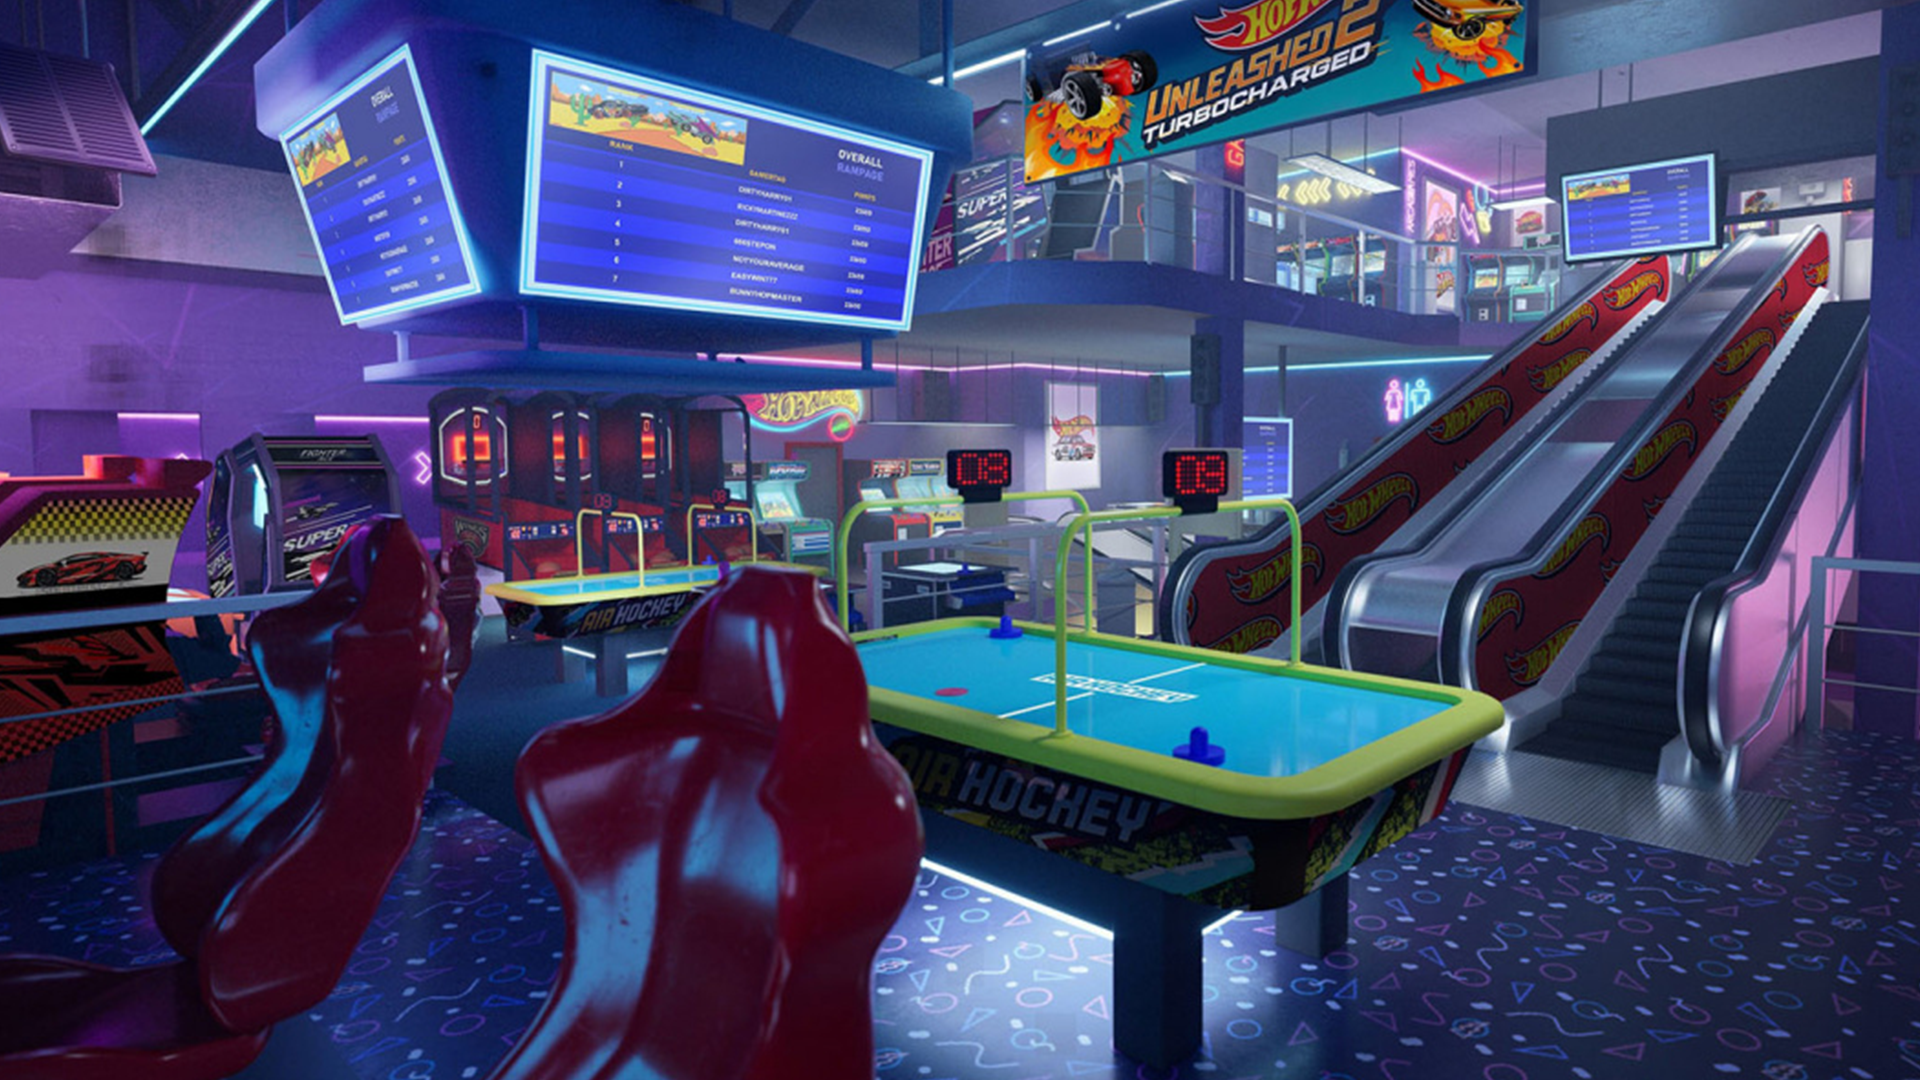 Read more about the article Arcade Map Revealed in Hot Wheels Unleashed 2: A Nostalgic Haven for Fans of Classic Arcade Games